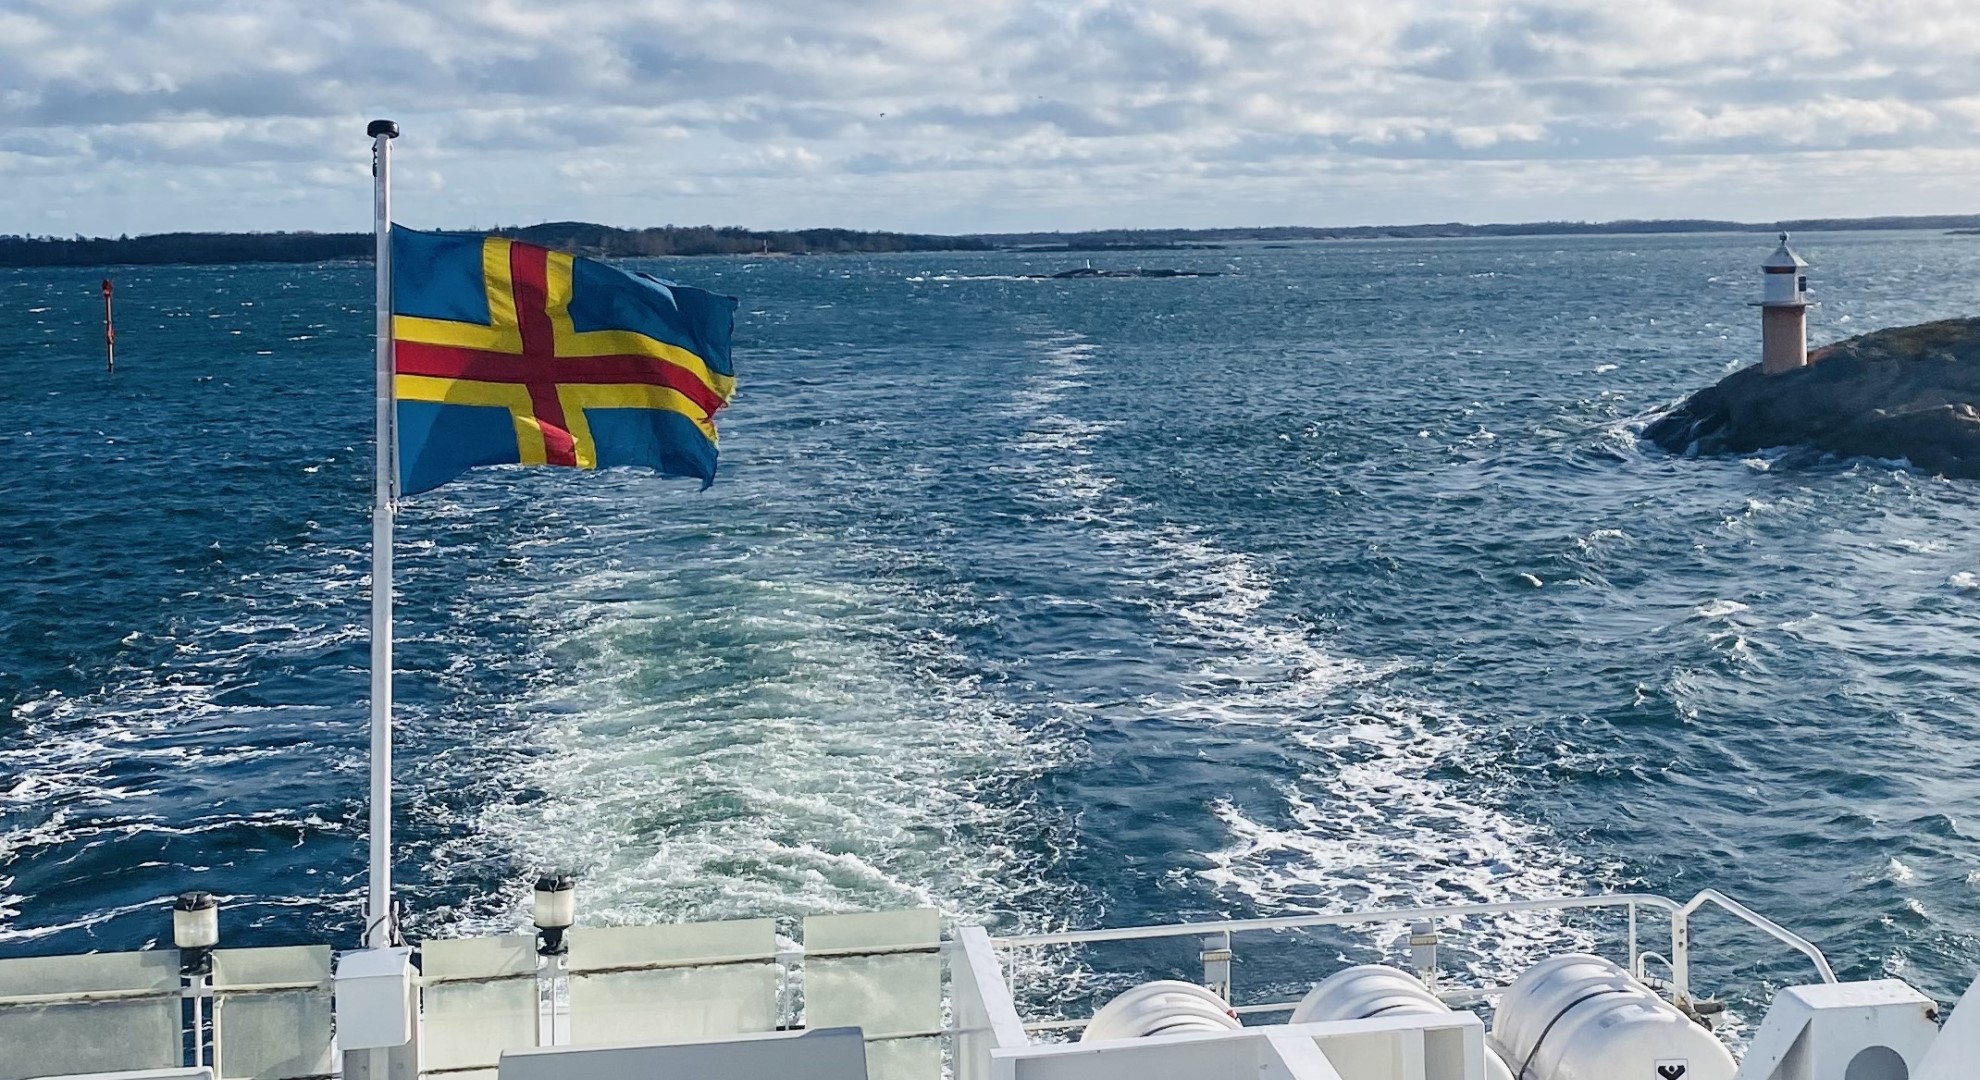 Back of the boat decorated with the Åland flag with a view of the sea behind it